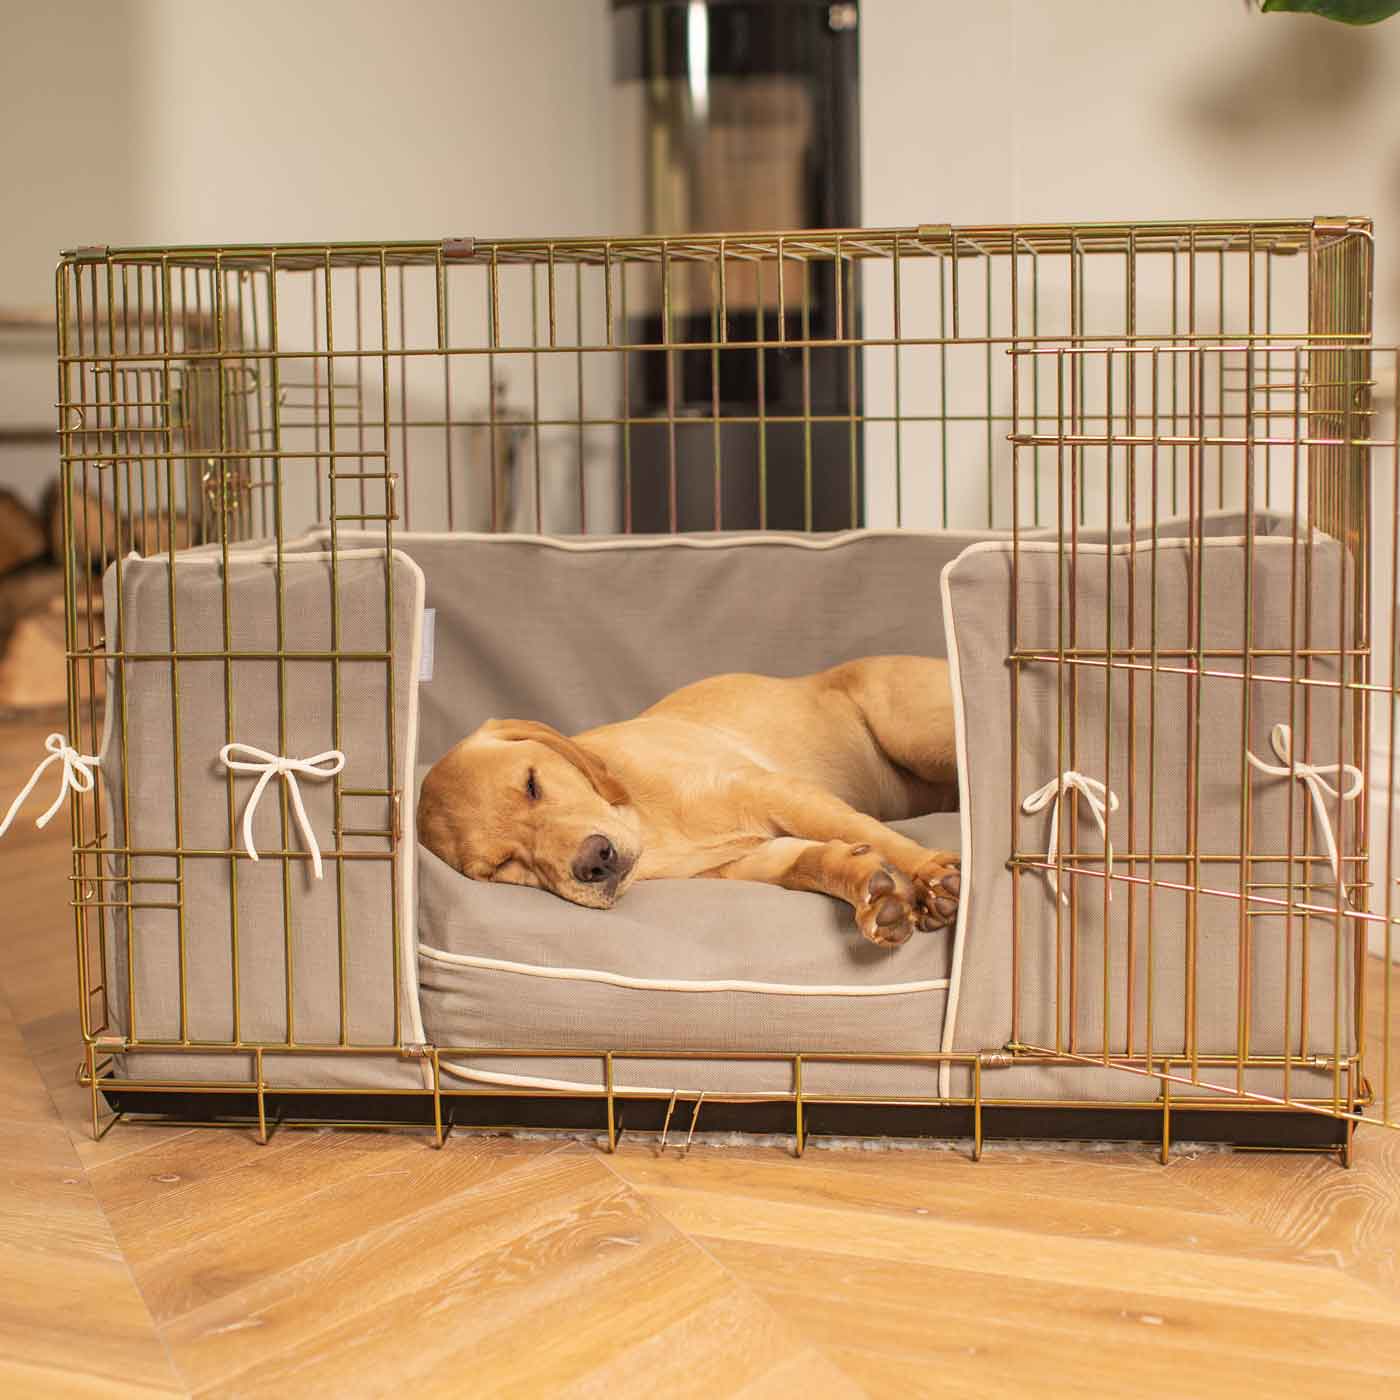 Luxury Dog Cage Bumper, Savanna Stone Cage Bumper Cover The Perfect Dog Cage Accessory, Available To Personalize Now at Lords & Labradors US